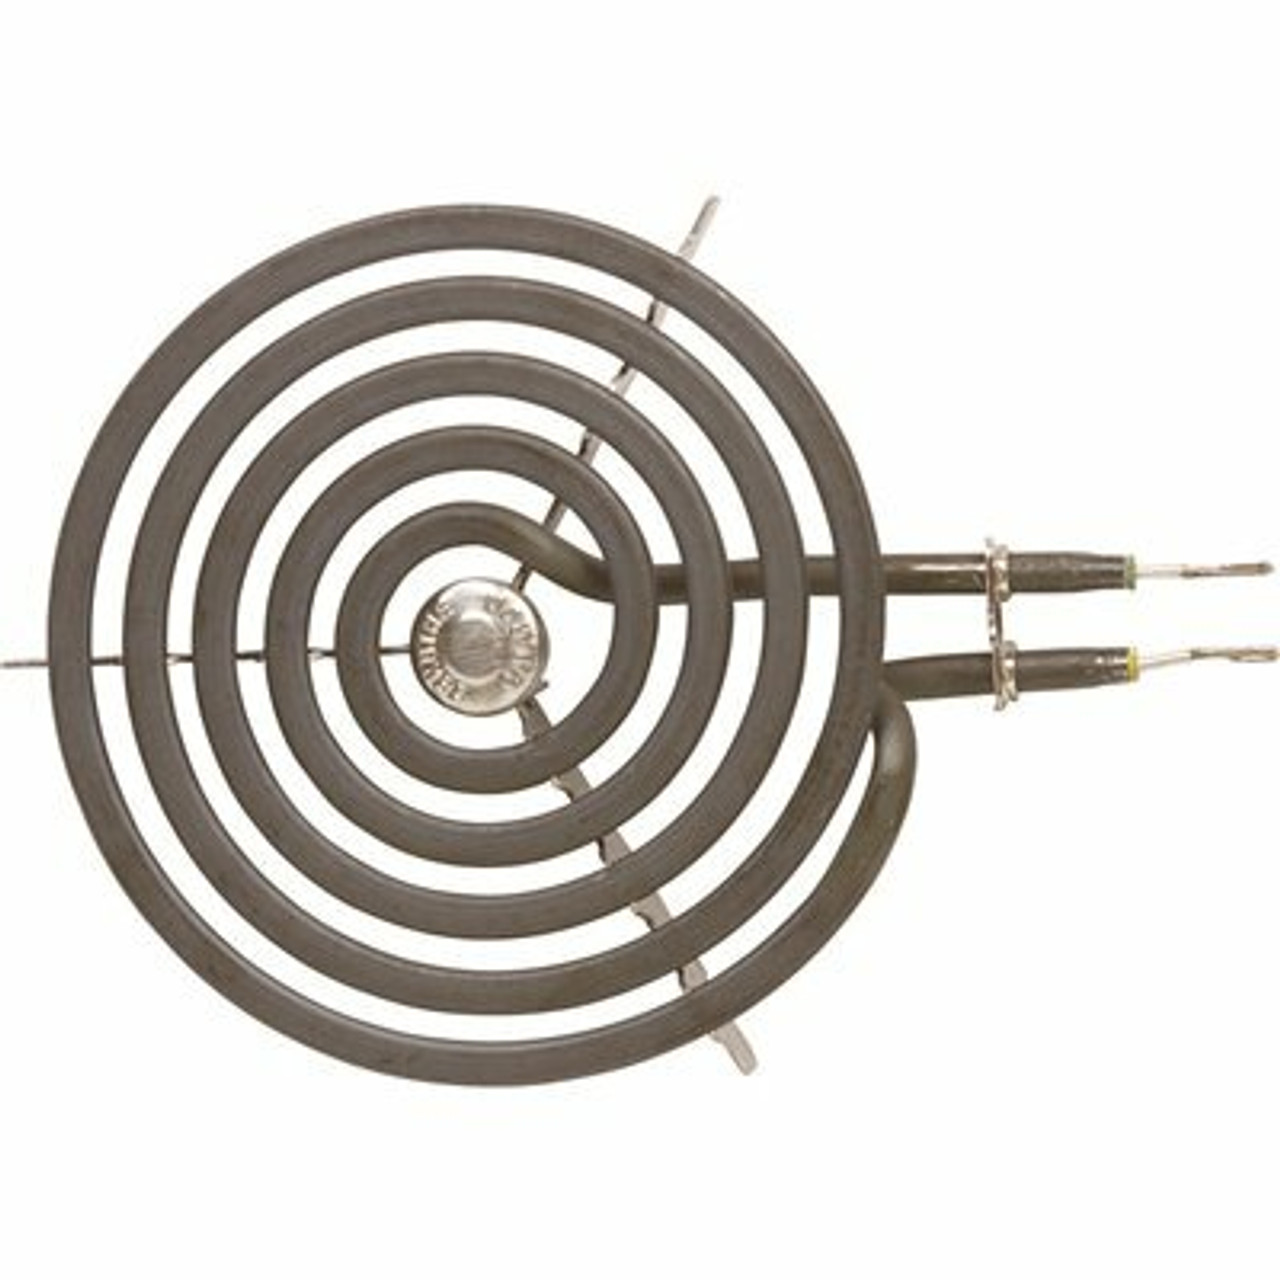 Ge 6 In. Heating Element